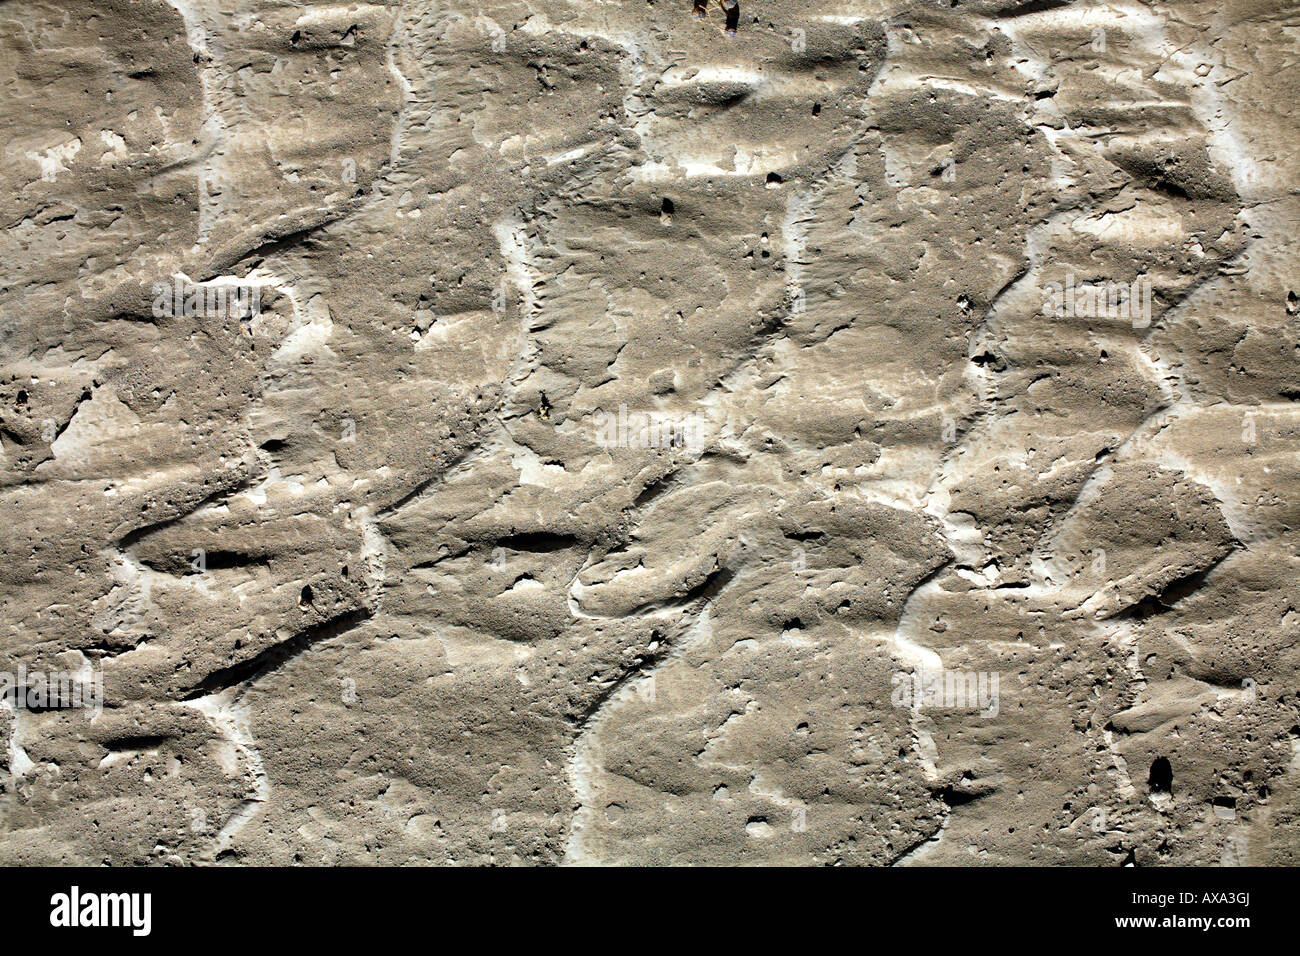 Ripple marks on a dry stream bed Stock Photo